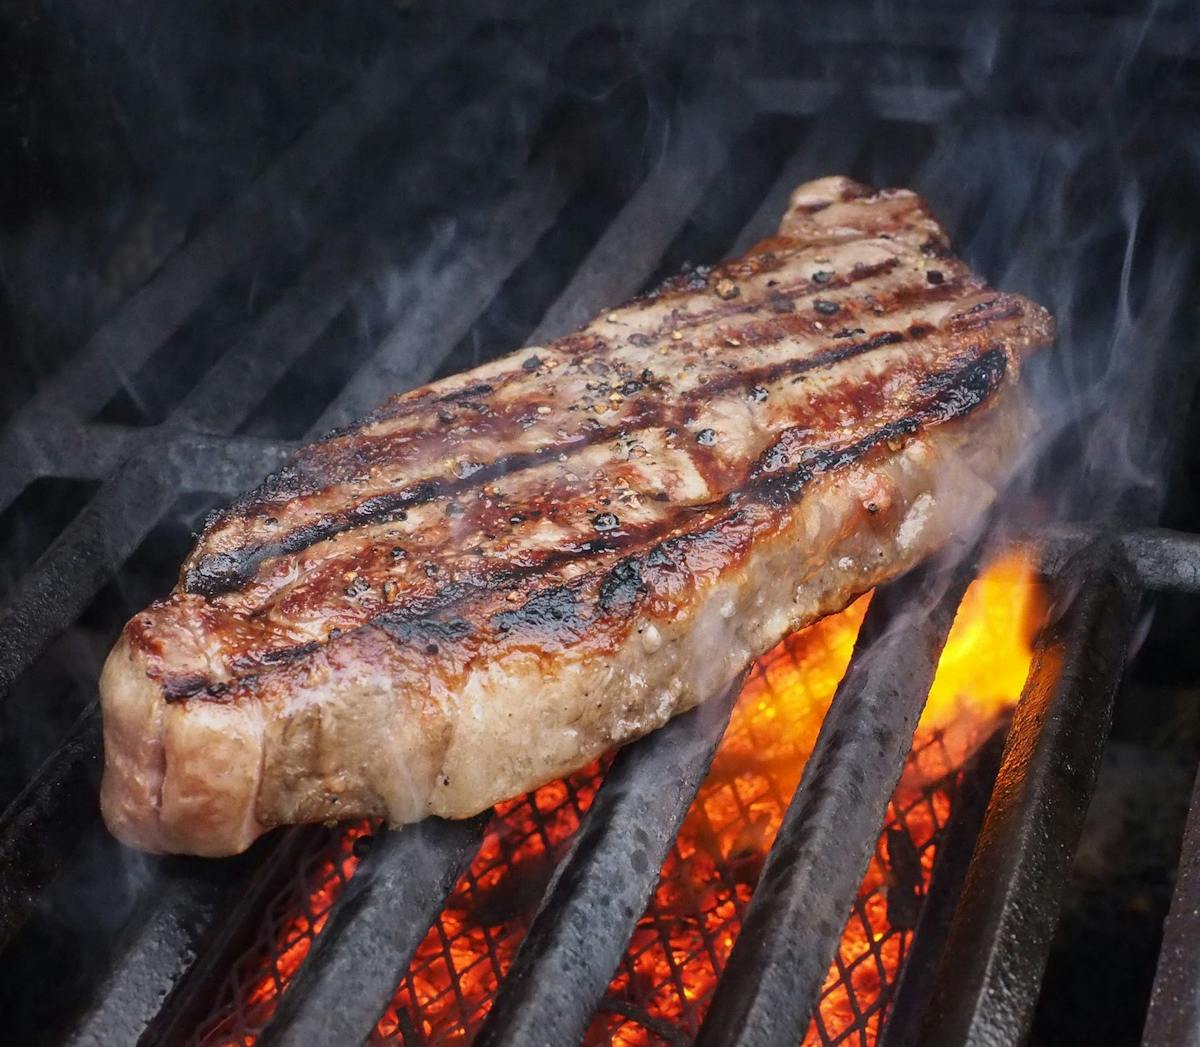 a piece of meat being cooked on a grill